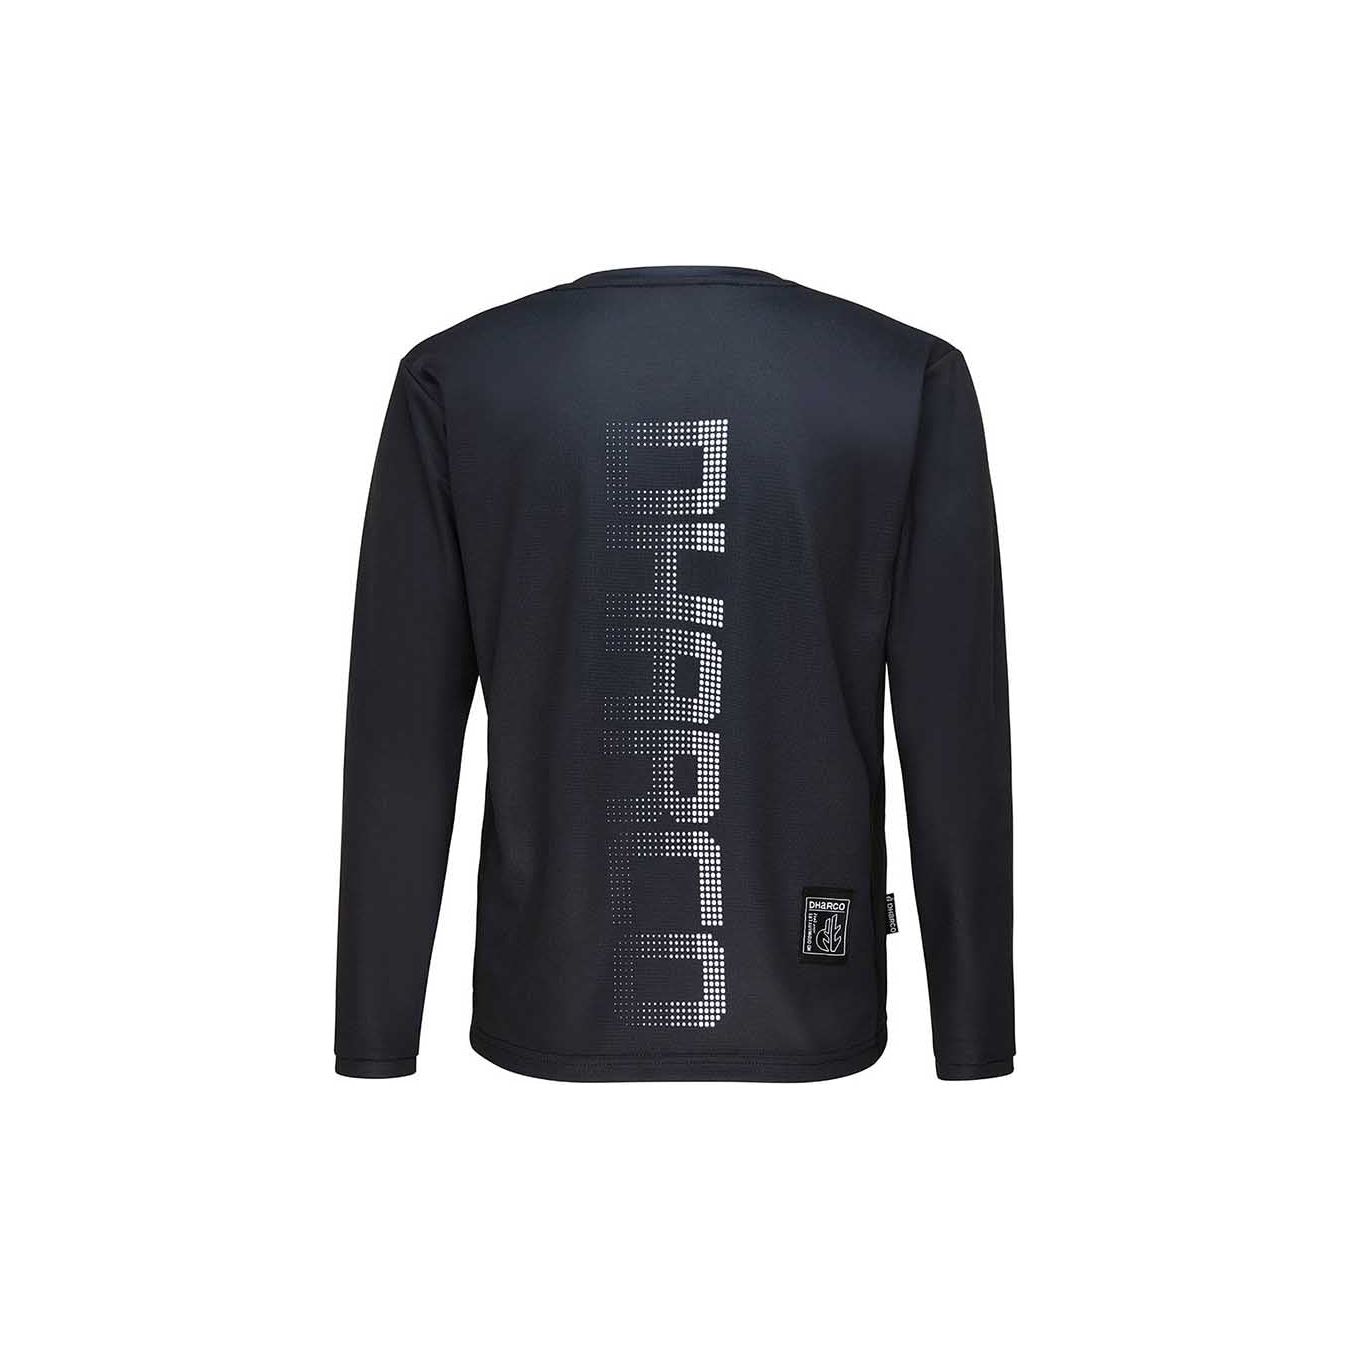 DHaRCO Youth Gravity Long Sleeve Jersey - Youth 2XL - Stealth